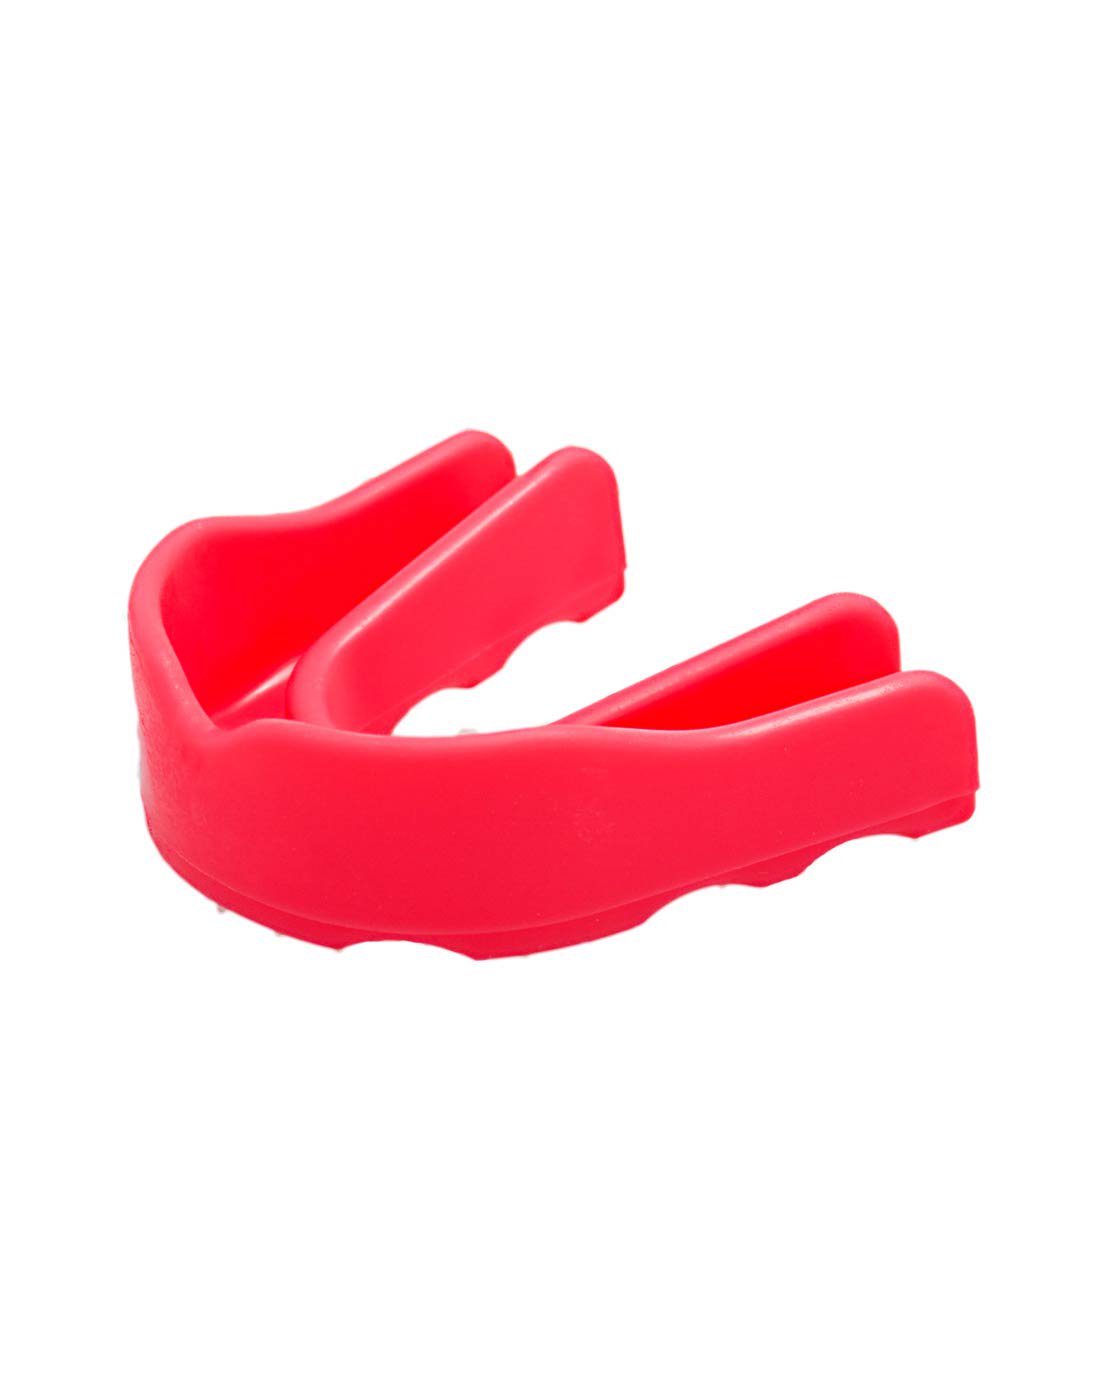 Adams Adult Mouth Guard New Great for All Sports